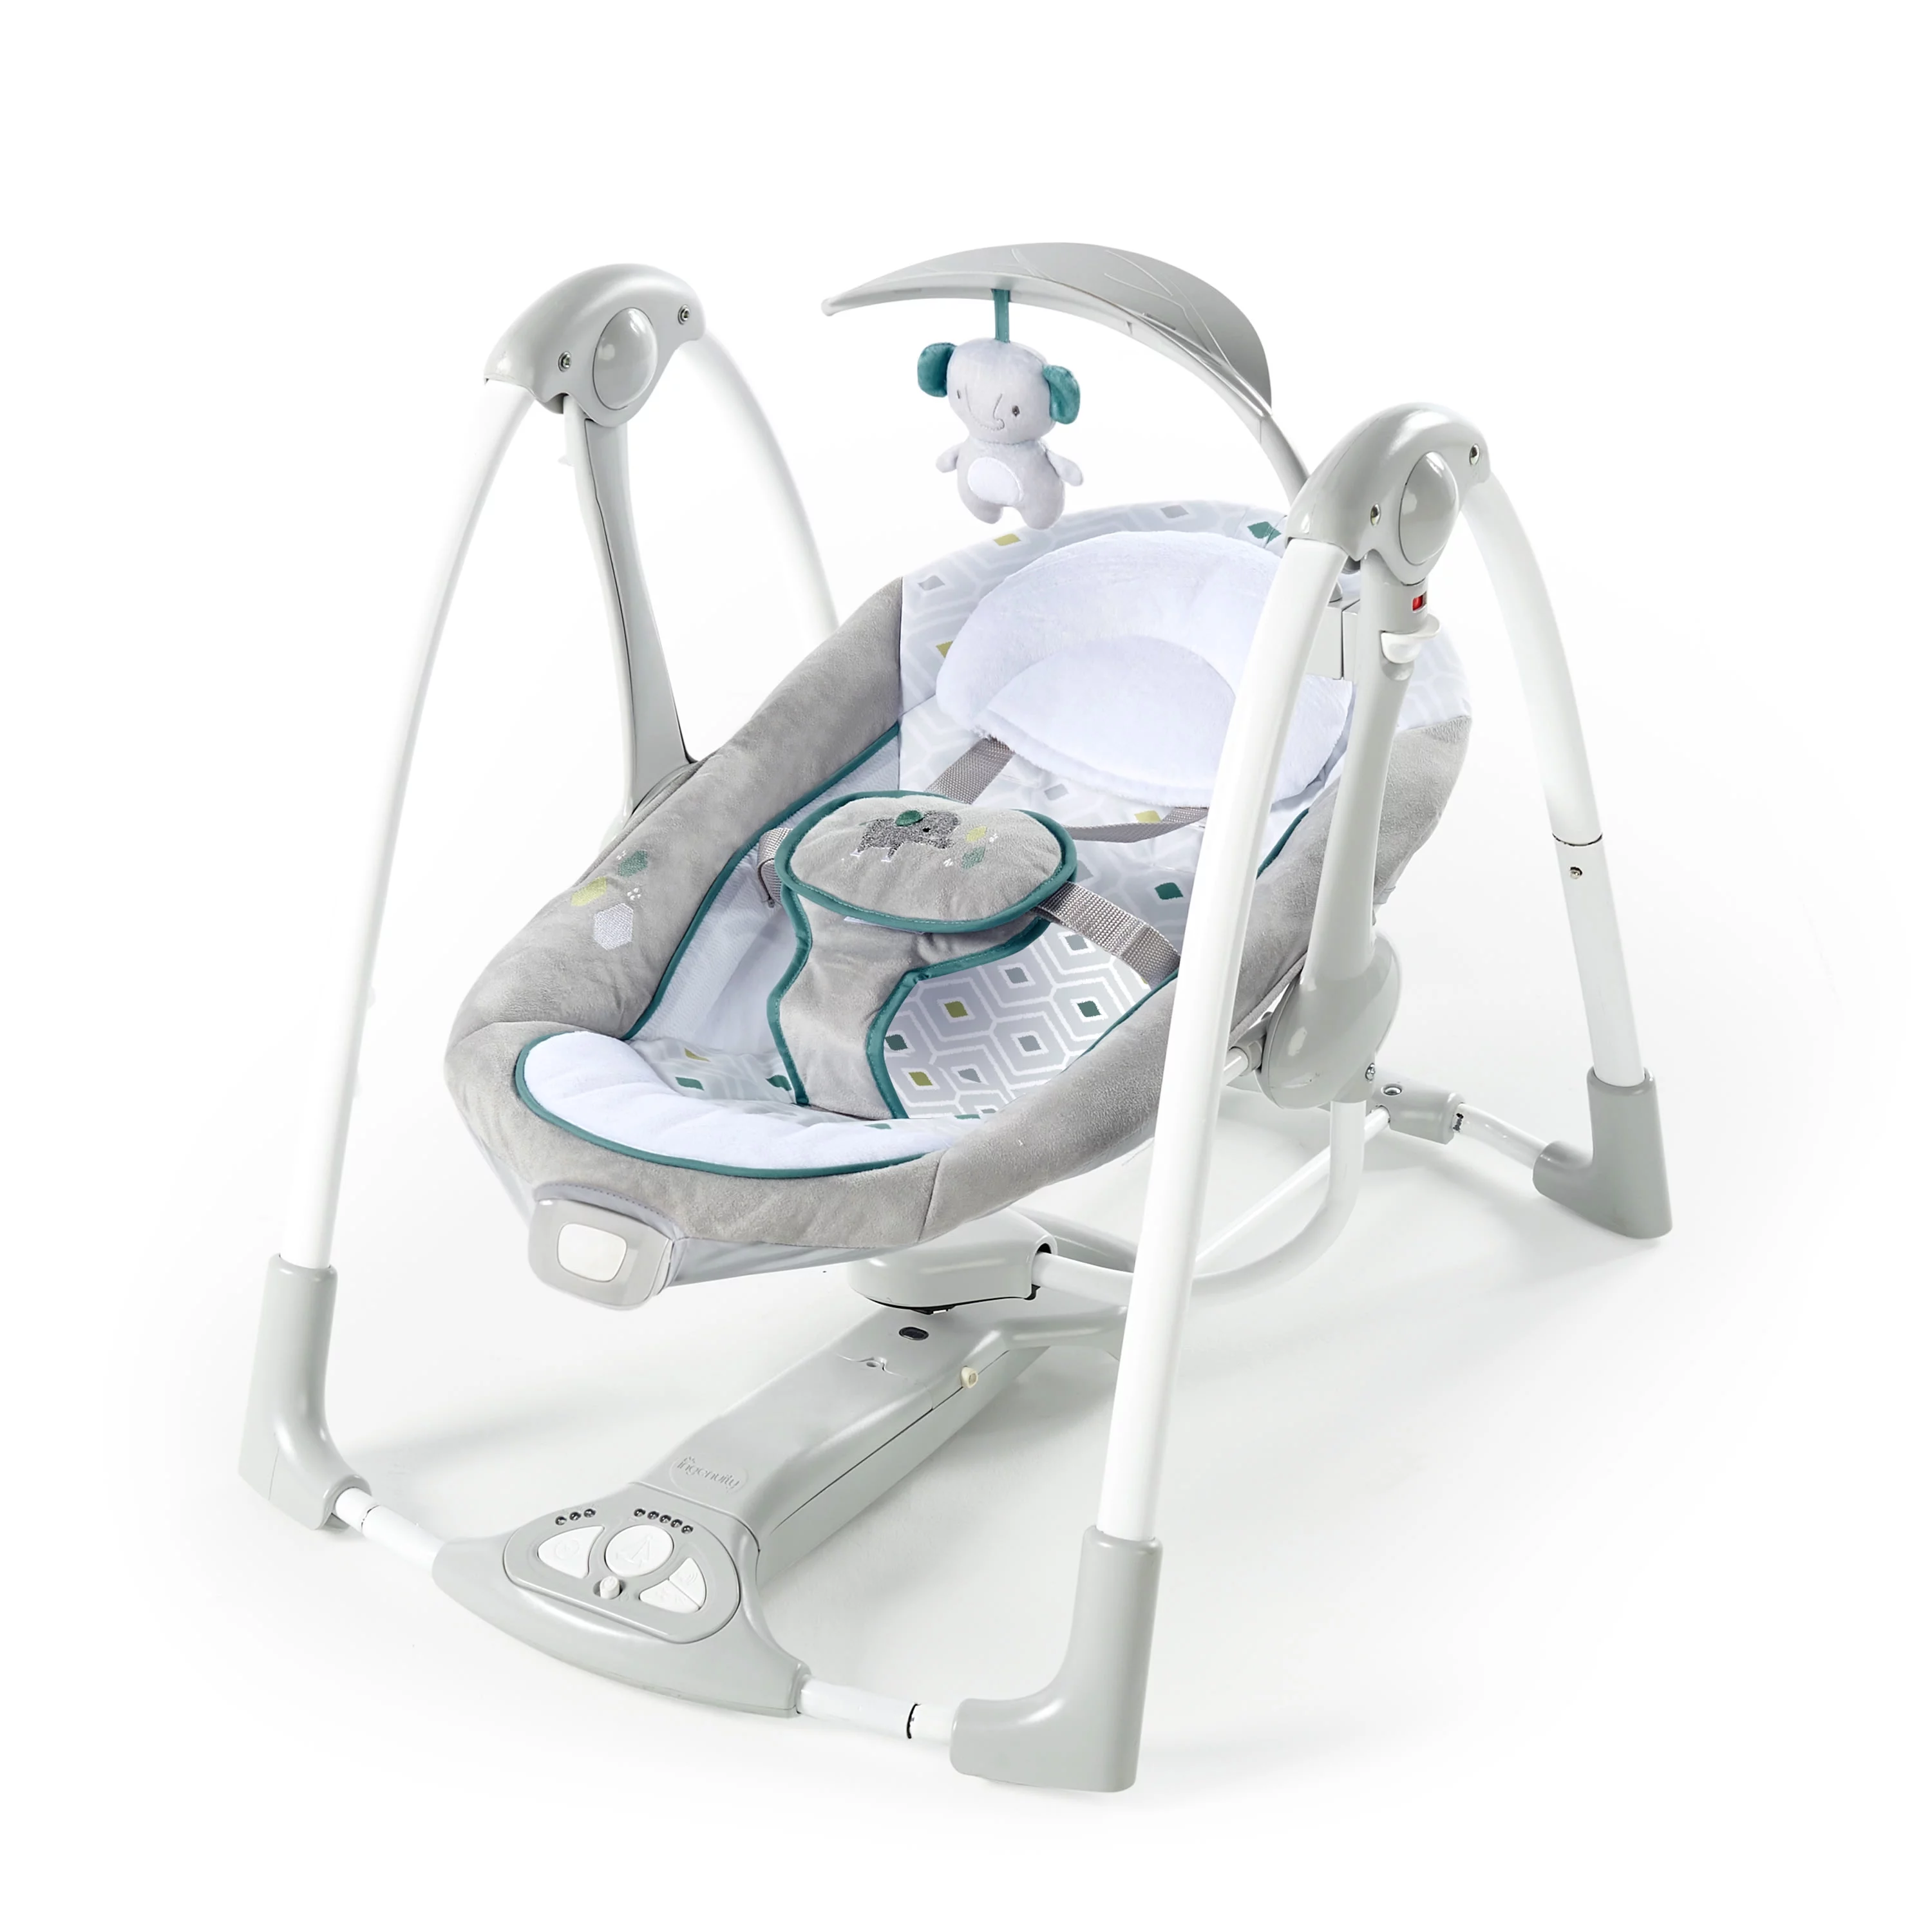 Ingenuity 2-in-1 Vibrating Portable Baby Swing, Gray